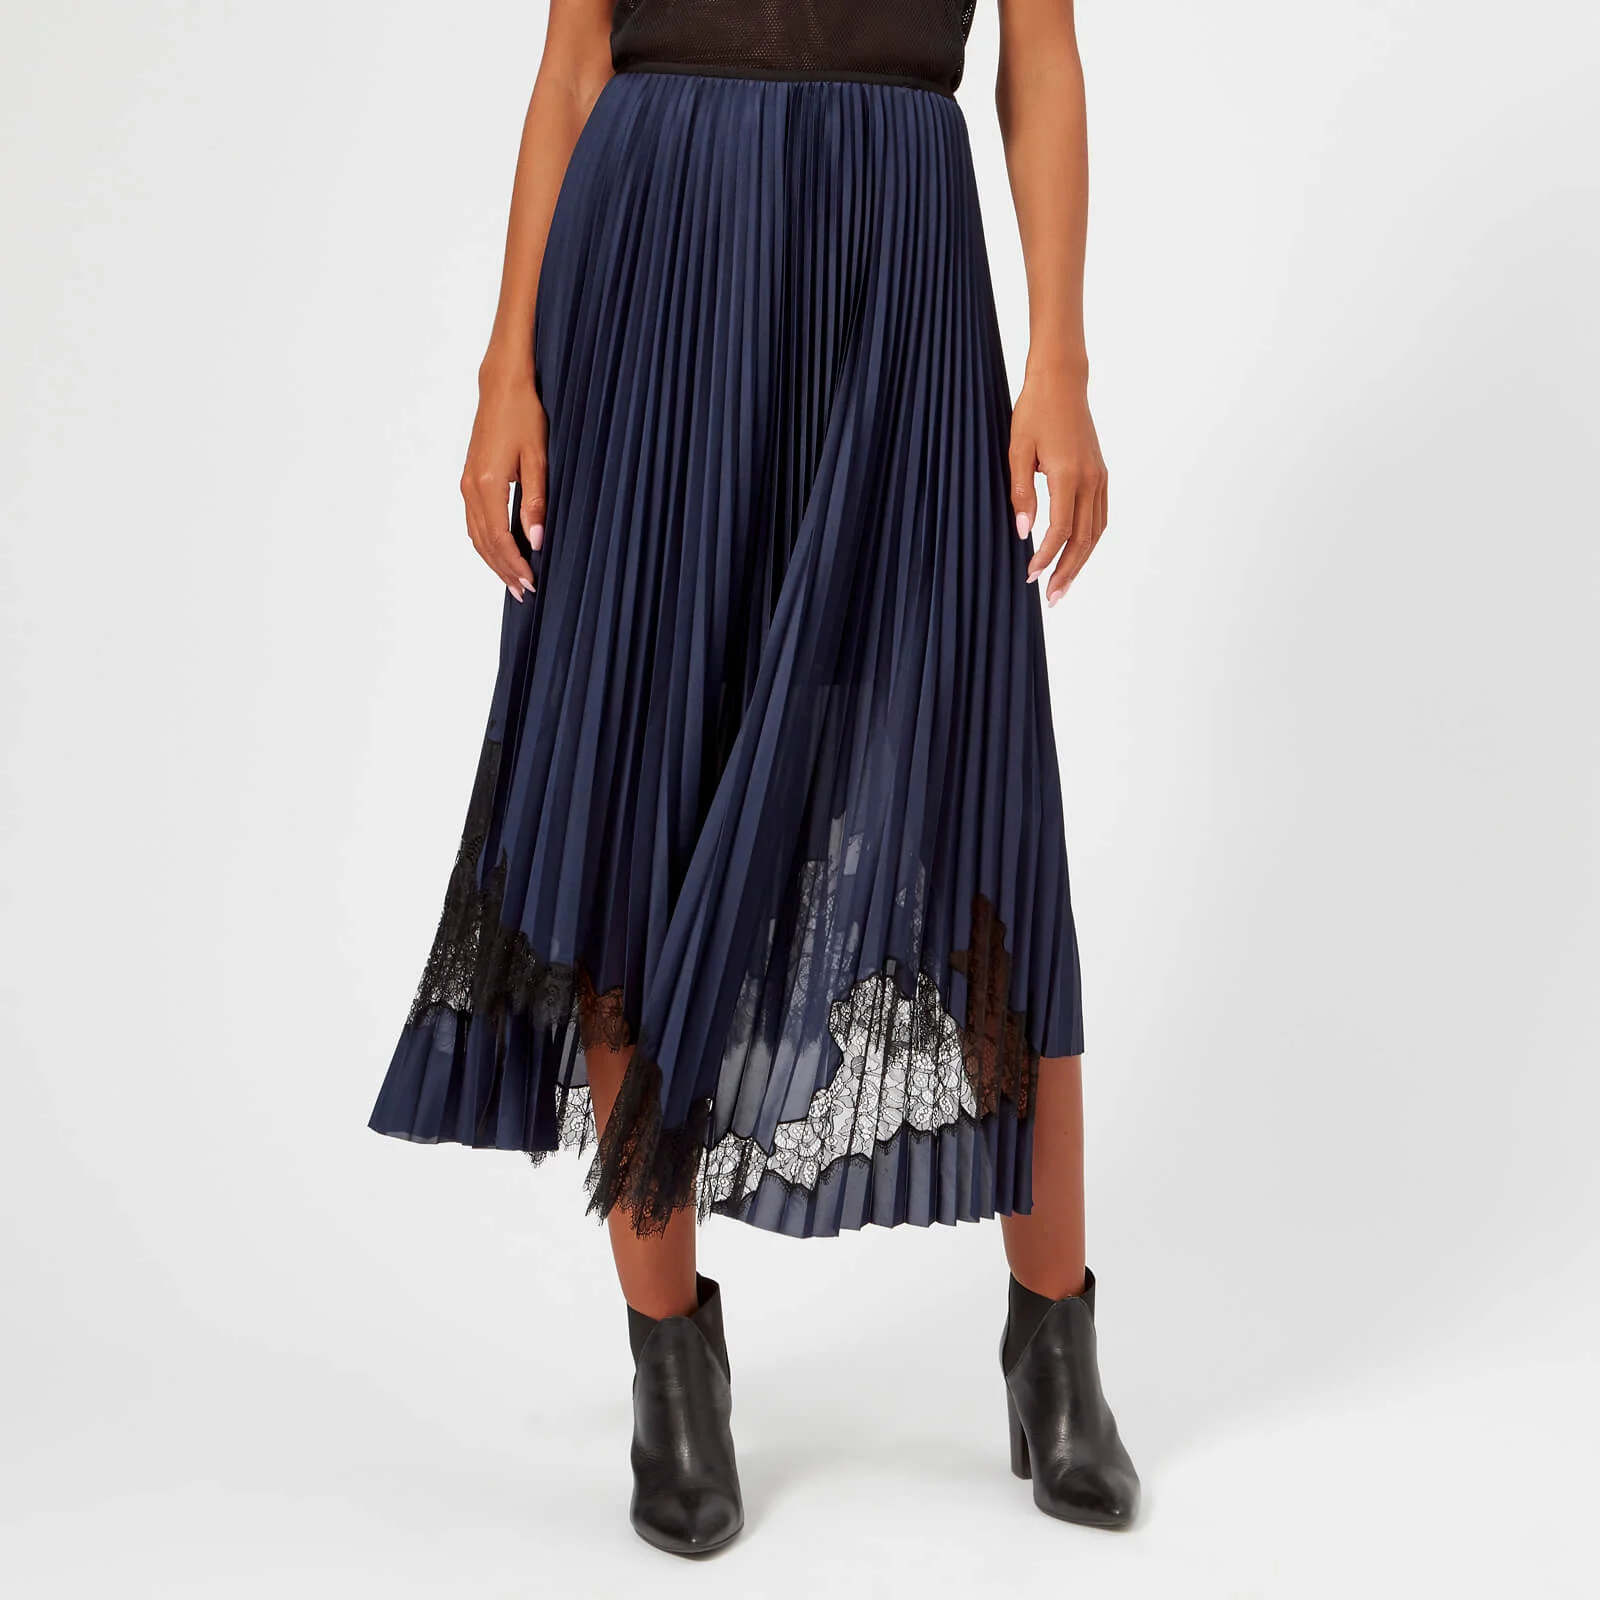 Helmut Lang Women's Pleated Tricot Skirt - Blue Image 1